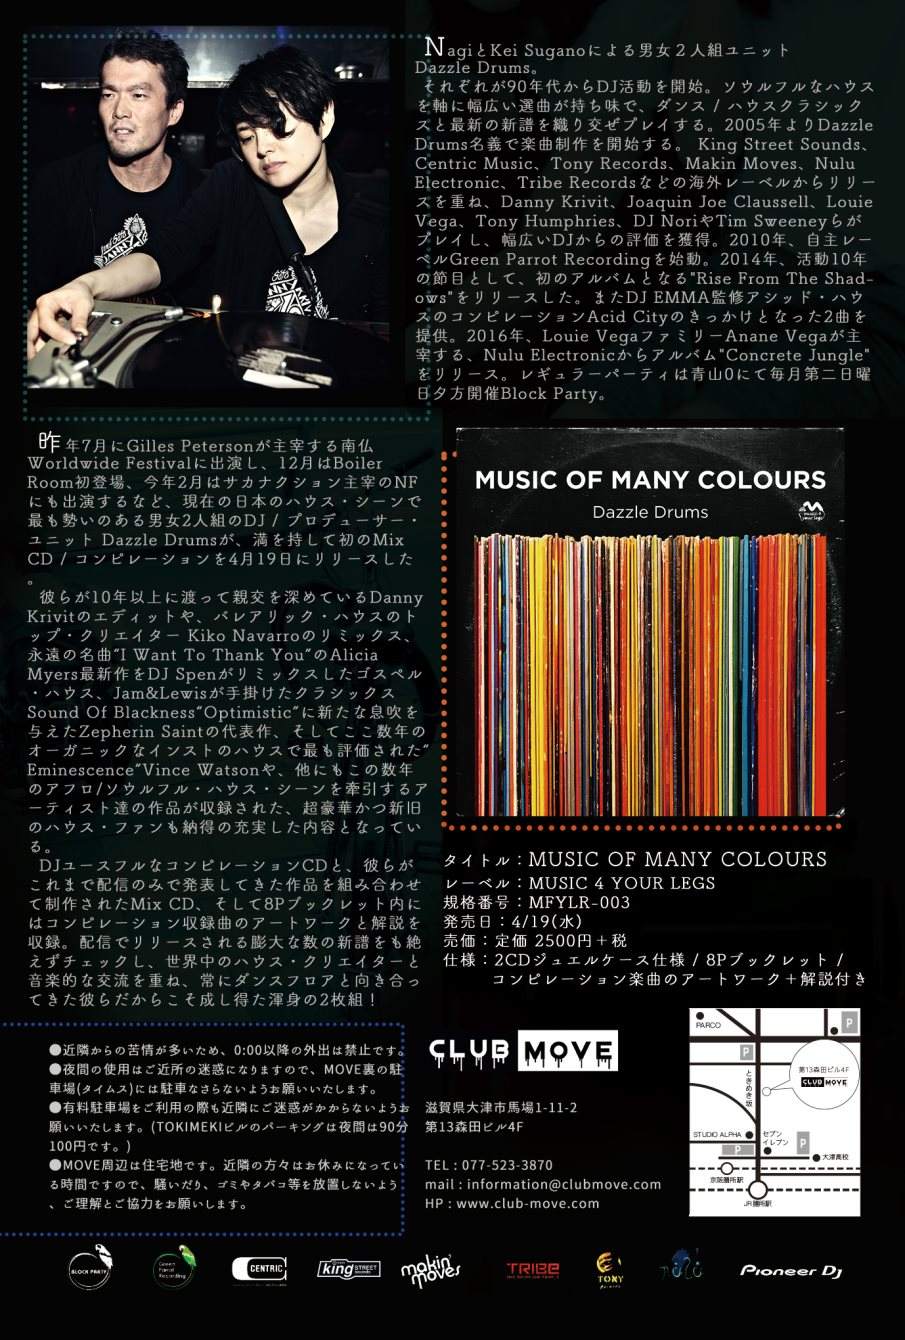 Dazzle Drums -Music Of Many Colours- Release Party Meets Feel -踊- Special - Página trasera